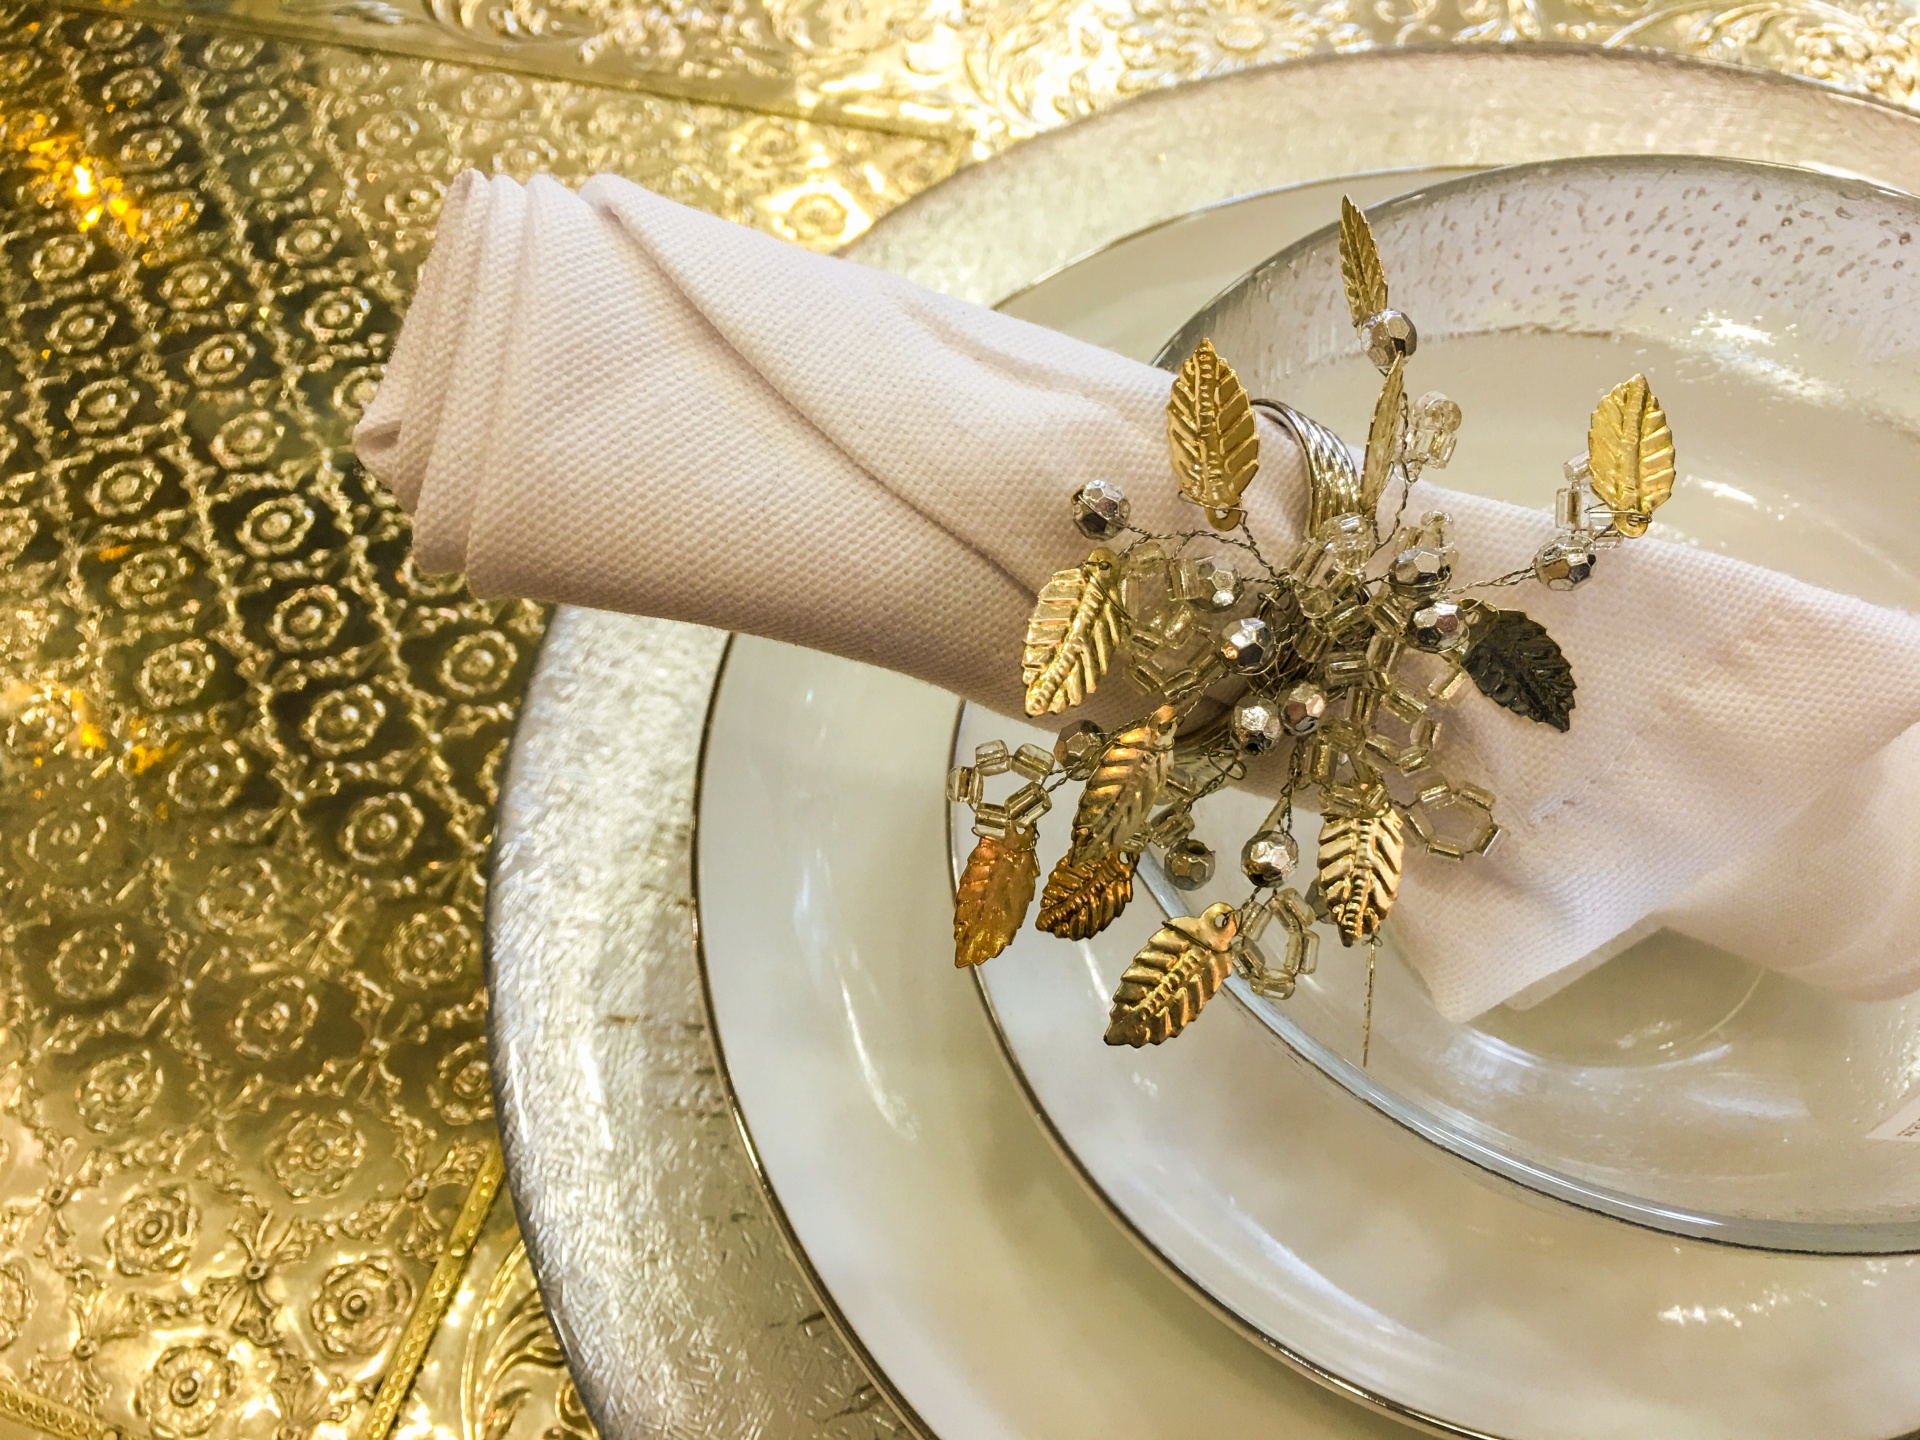 Plate On Luxury Gold Table